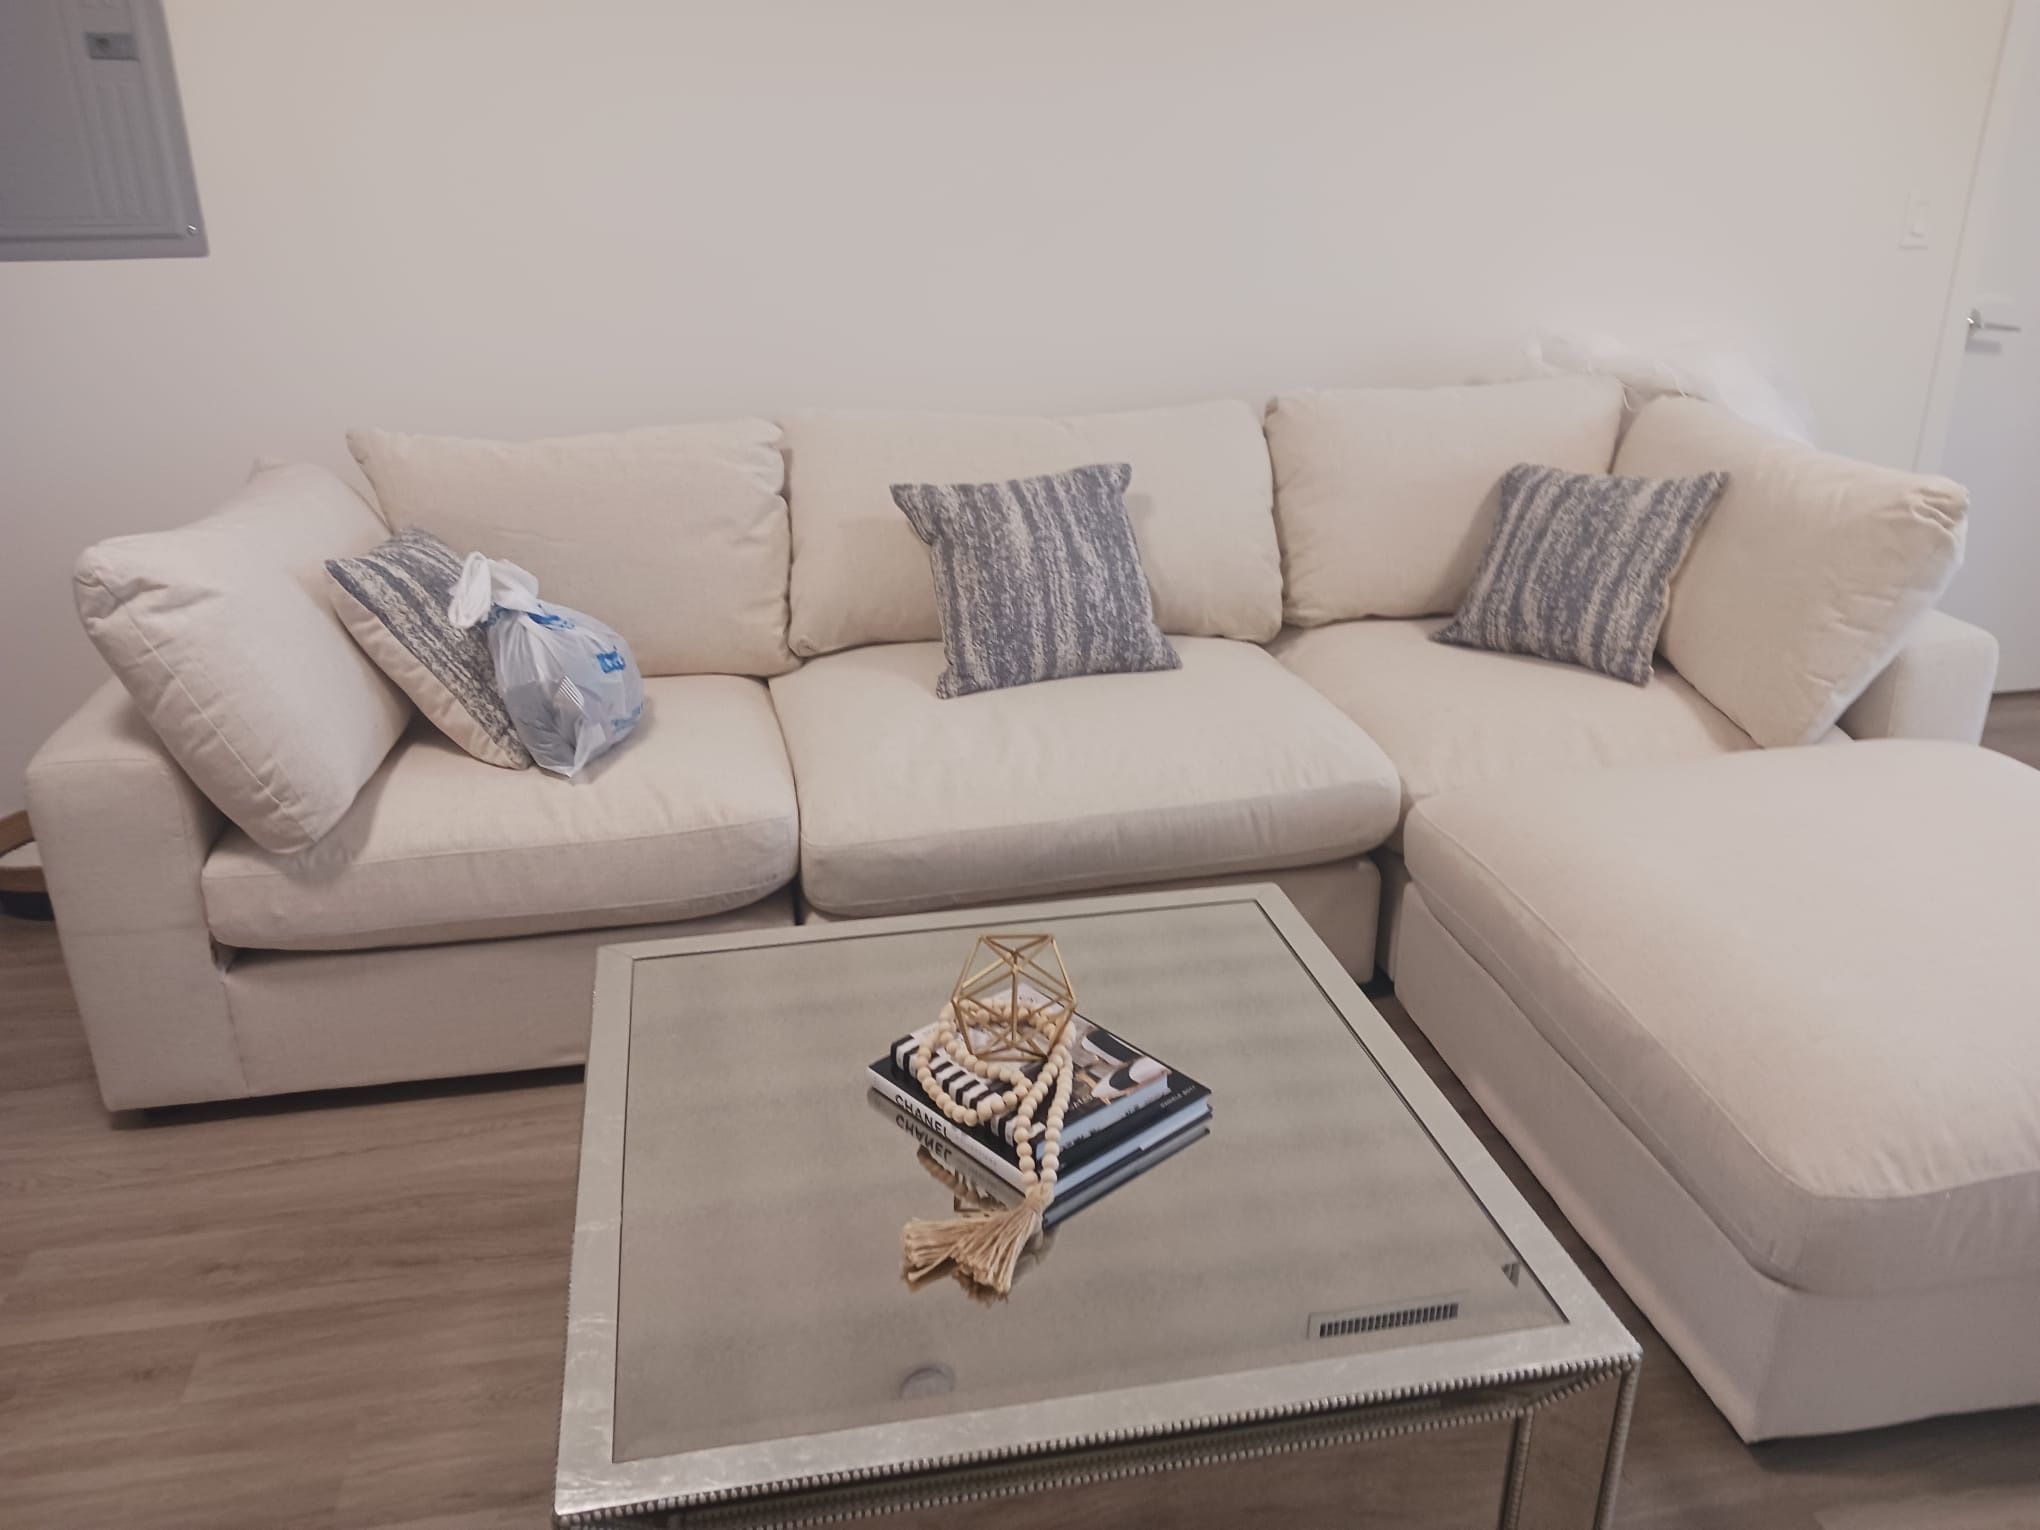 Beige/Cream Sectional Couch 